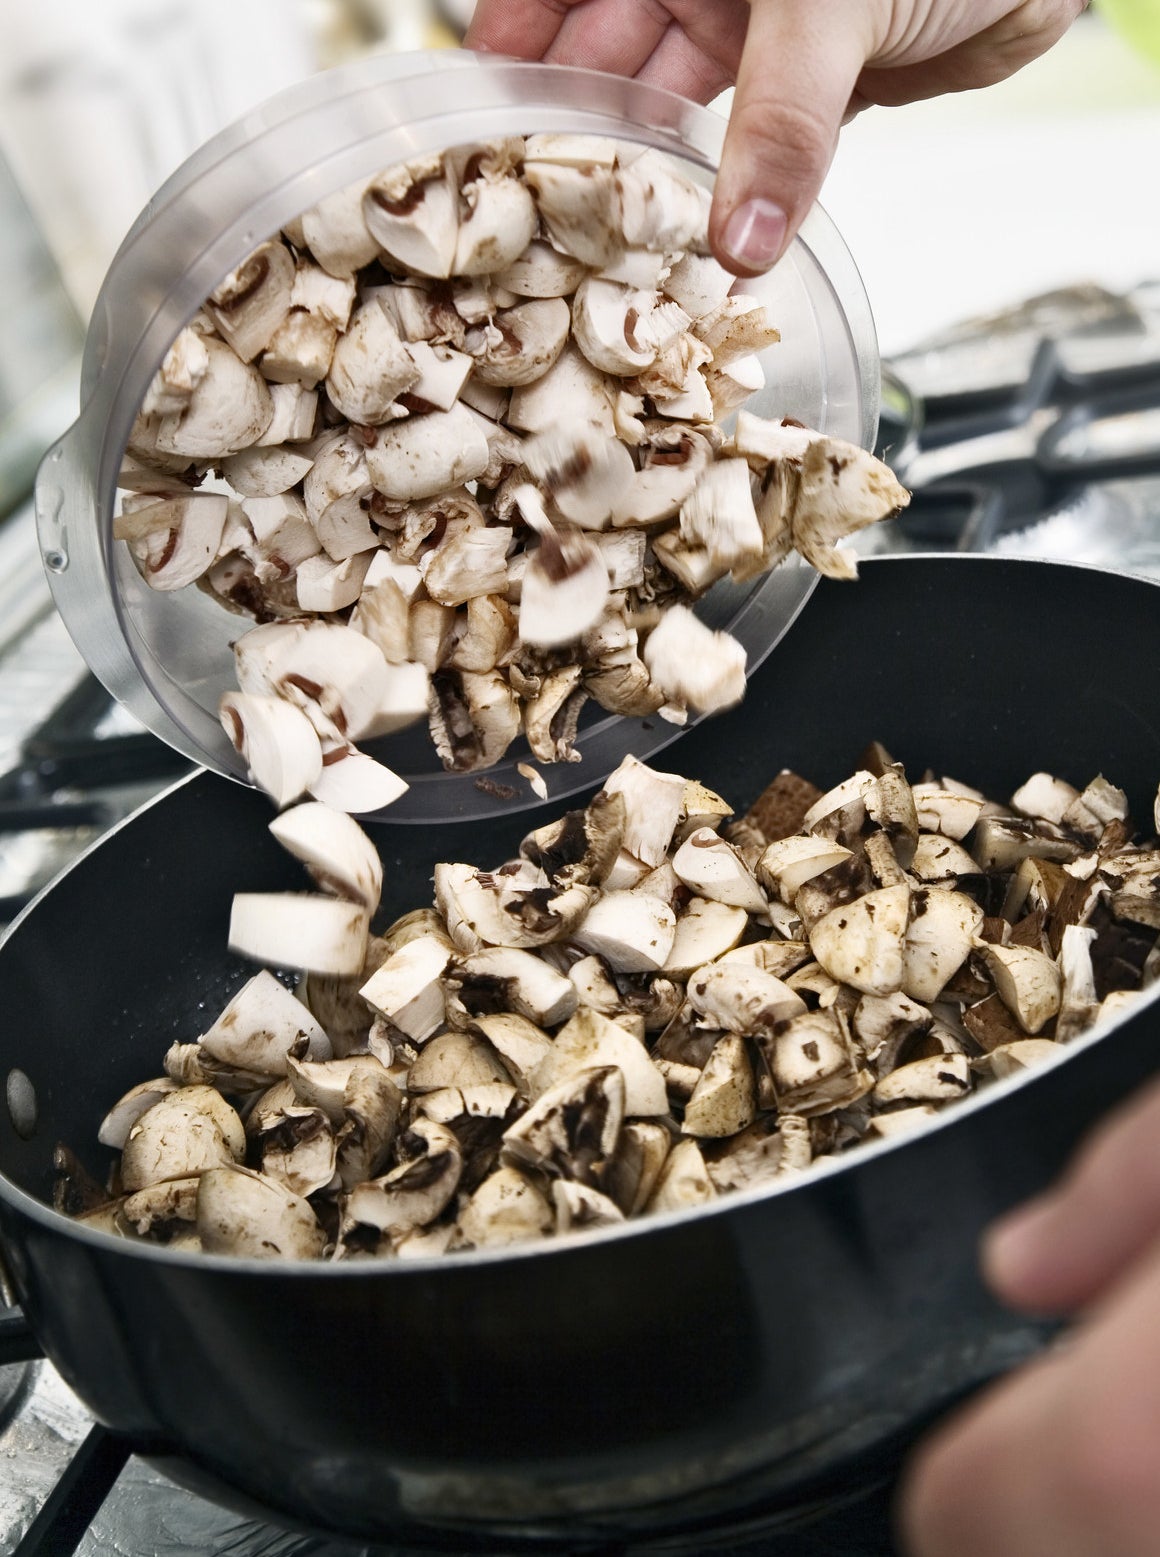 A cook pouring sliced mushrooms into a pan